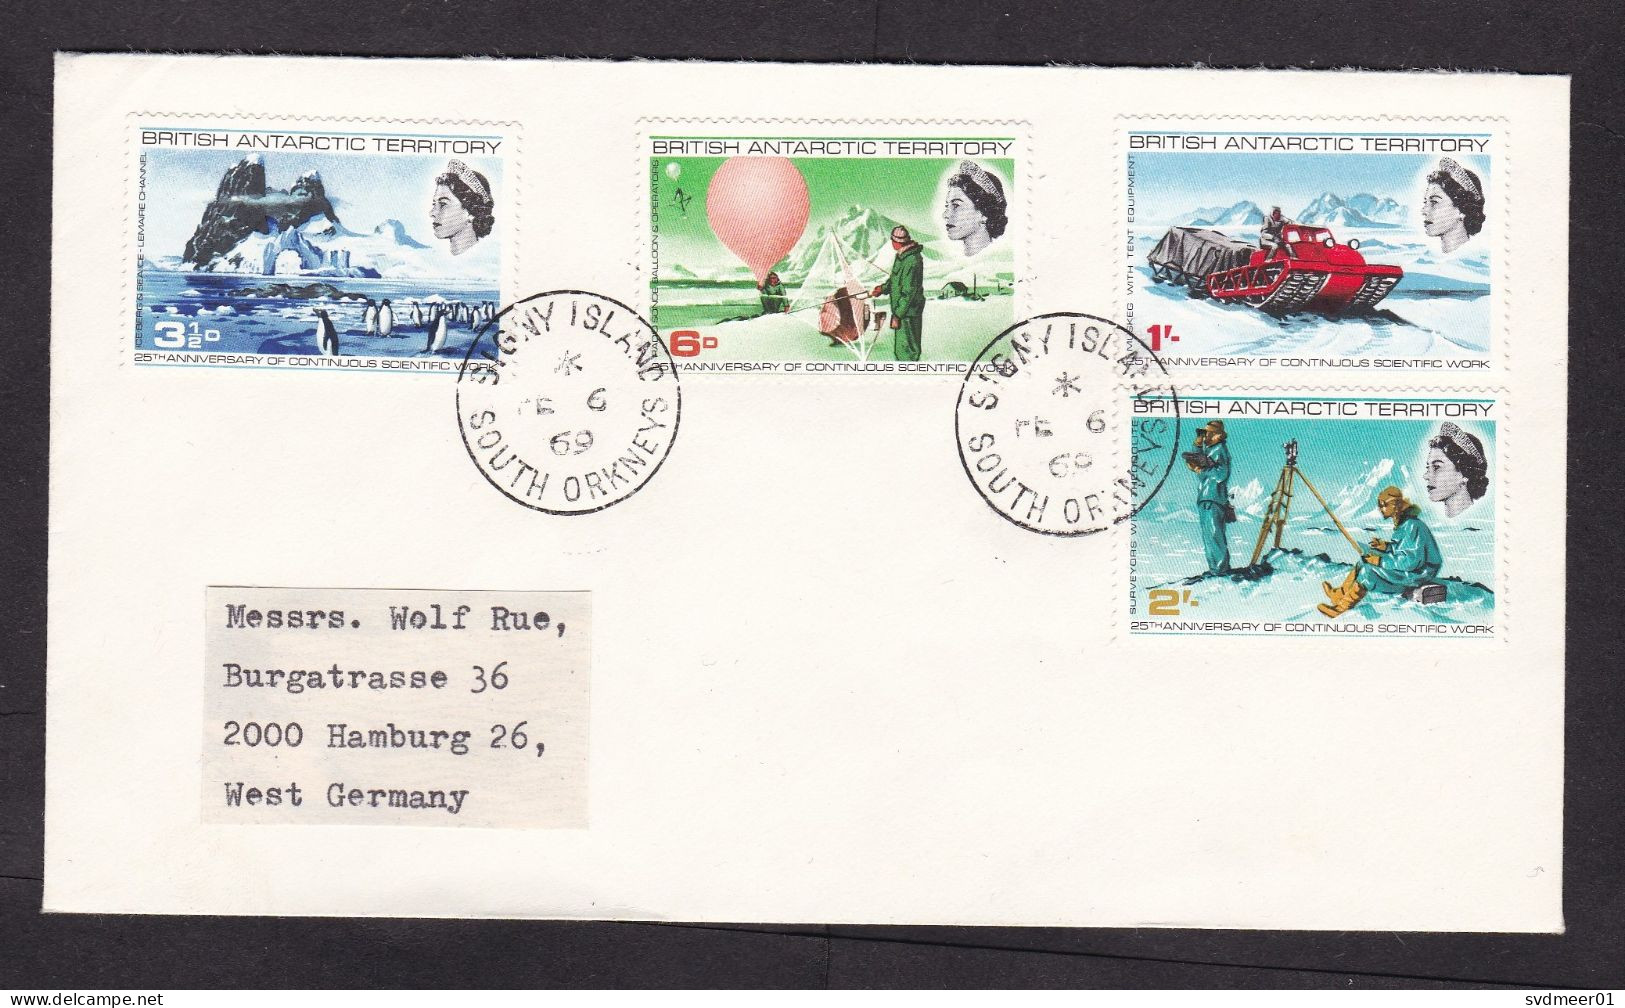 British Antarctic Territory BAT: Cover To Germany, 1969, 4 Stamps, Signy Island South Orkneys (traces Of Use) - Covers & Documents